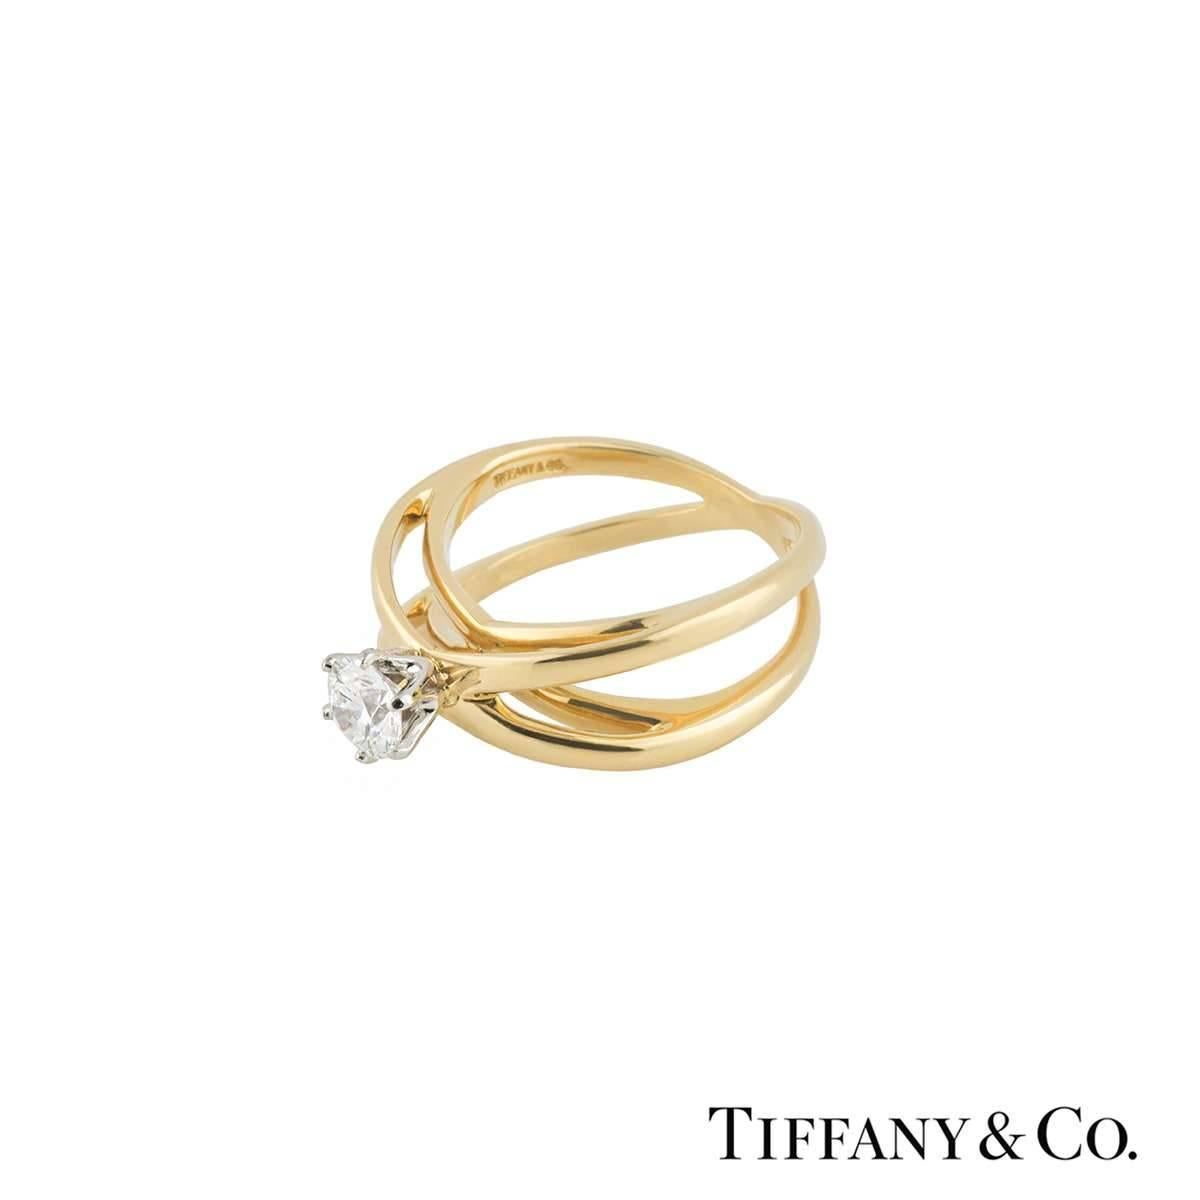 A lovely 18k yellow gold Tiffany & Co. diamond engagement ring. The ring comprises of a round brilliant cut diamond in a 6 claw with a total approximate weight of 0.40ct, F colour and VVS2 clarity. The ring has a crossover style band with a band